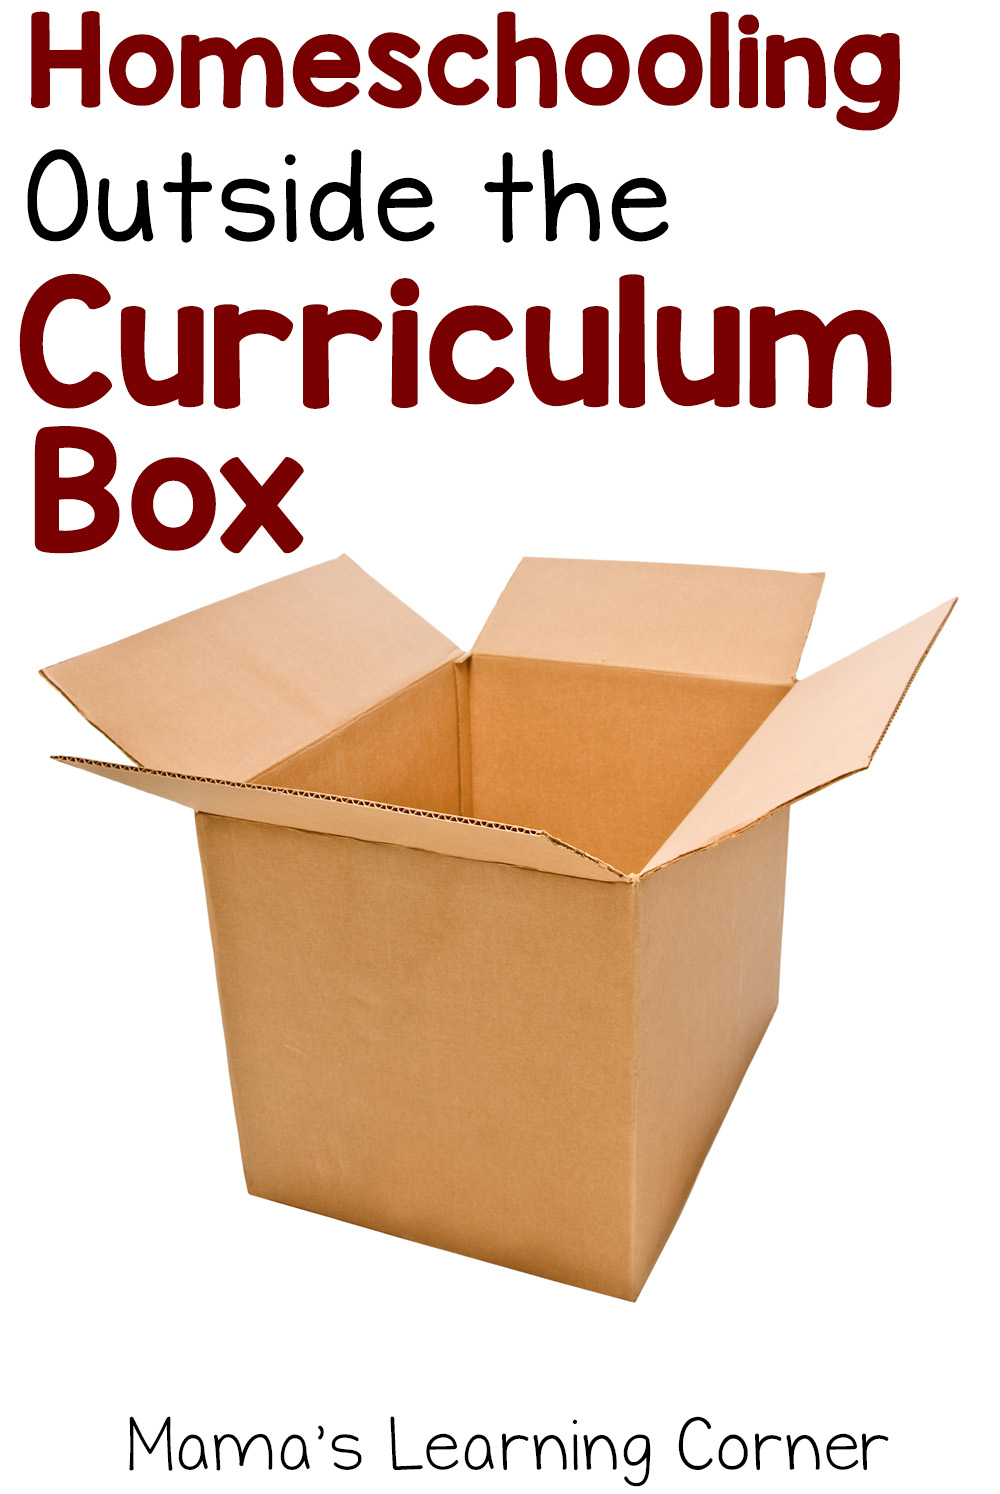 Homeschooling Outside the Curriculum Box